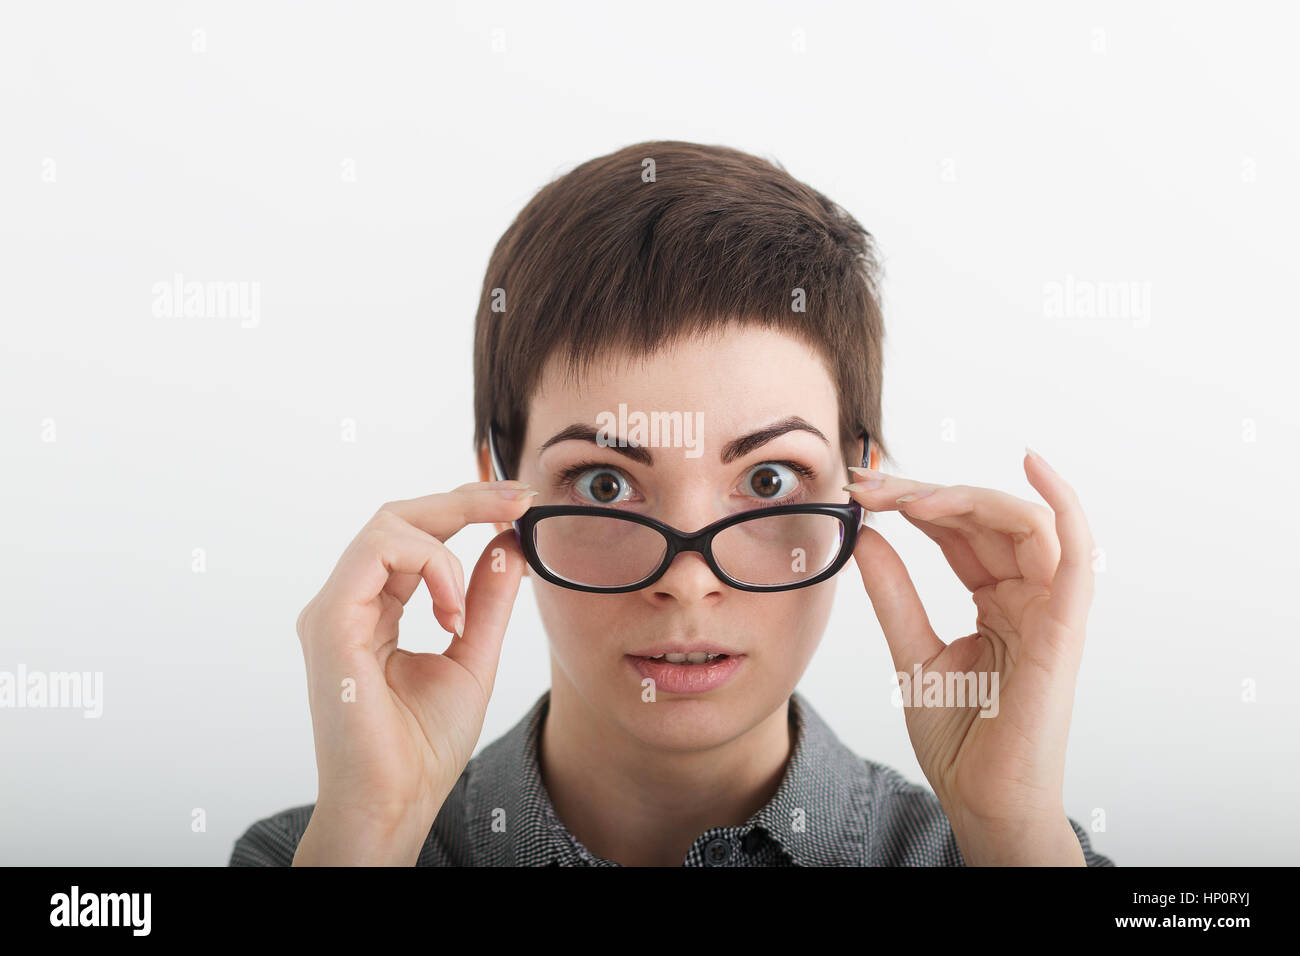 Close up of strict surprised young funny female teacher or student in glasses isolated on white background, looking over her glasses. Stock Photo